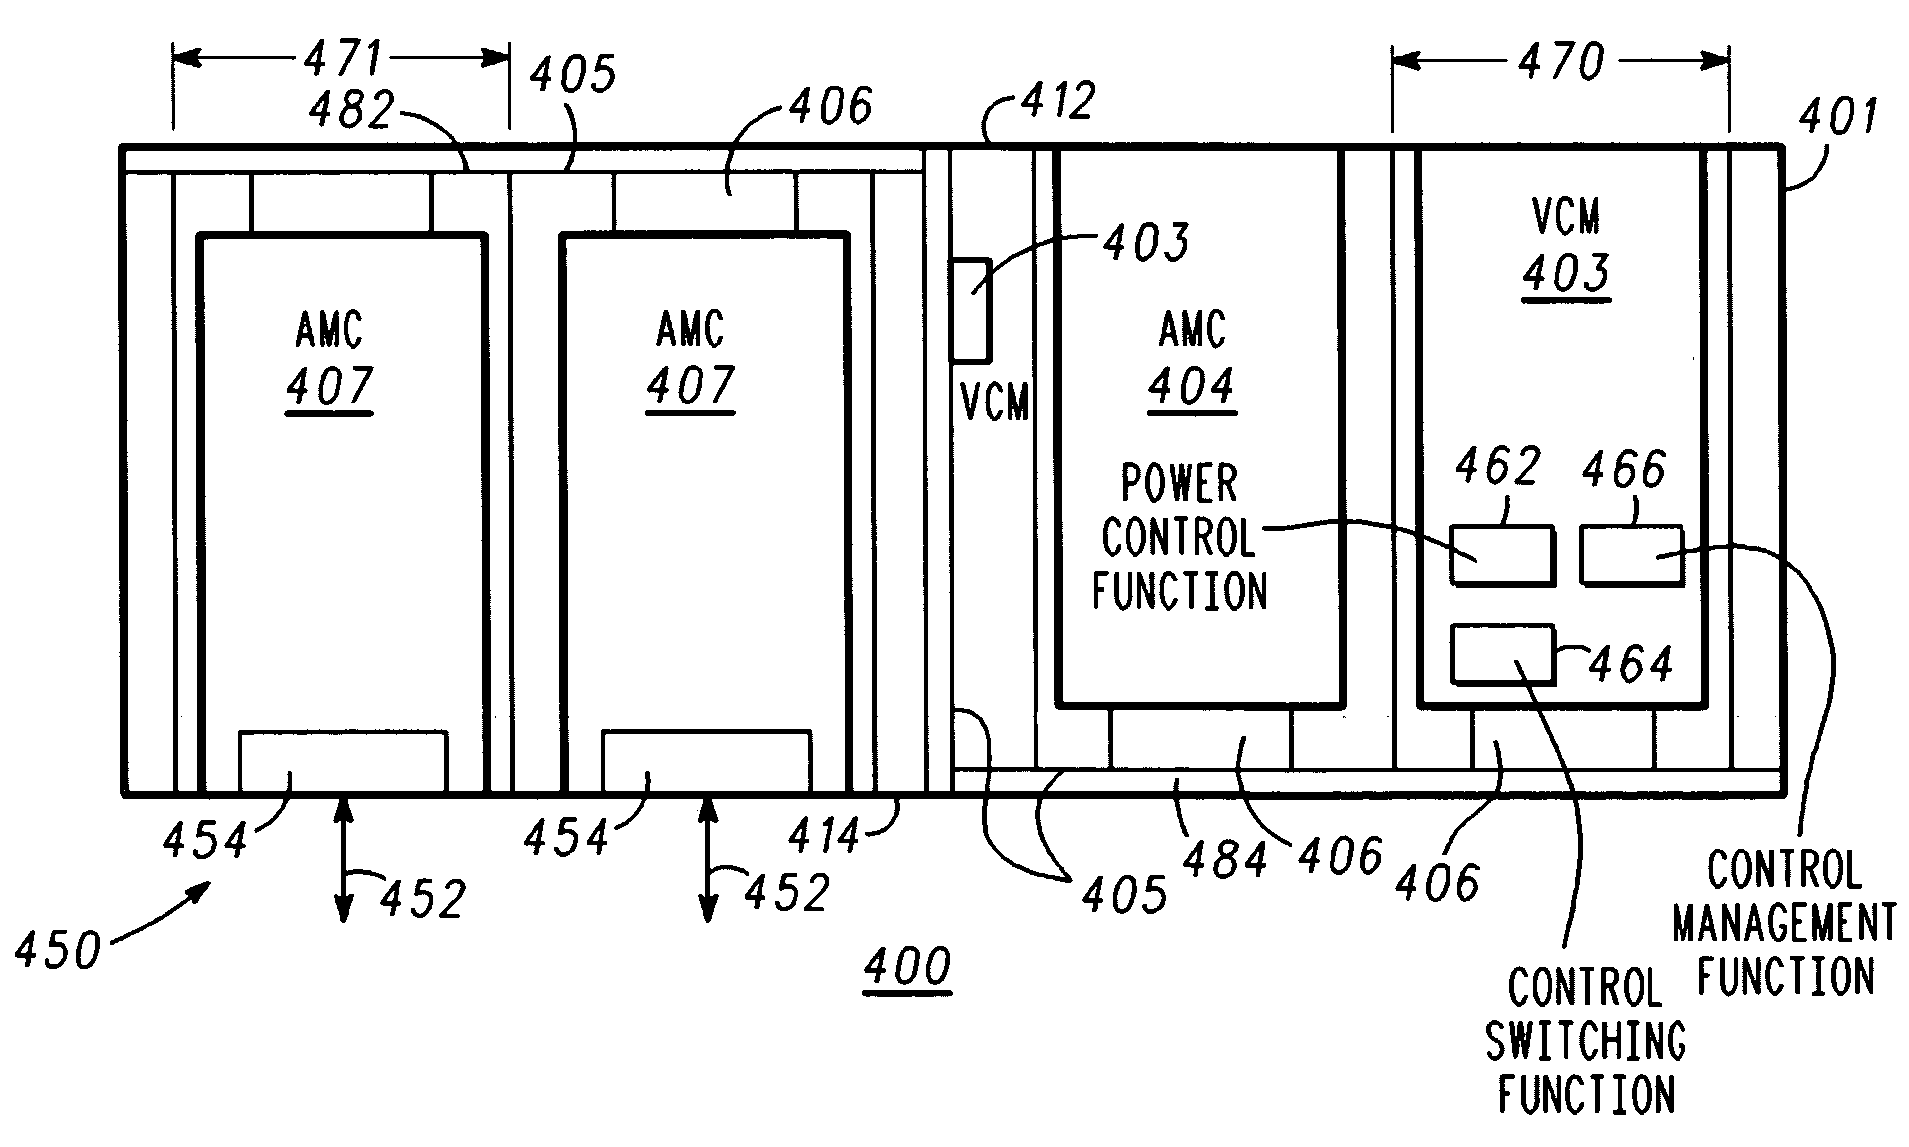 Monolithic backplane having a first and second portion